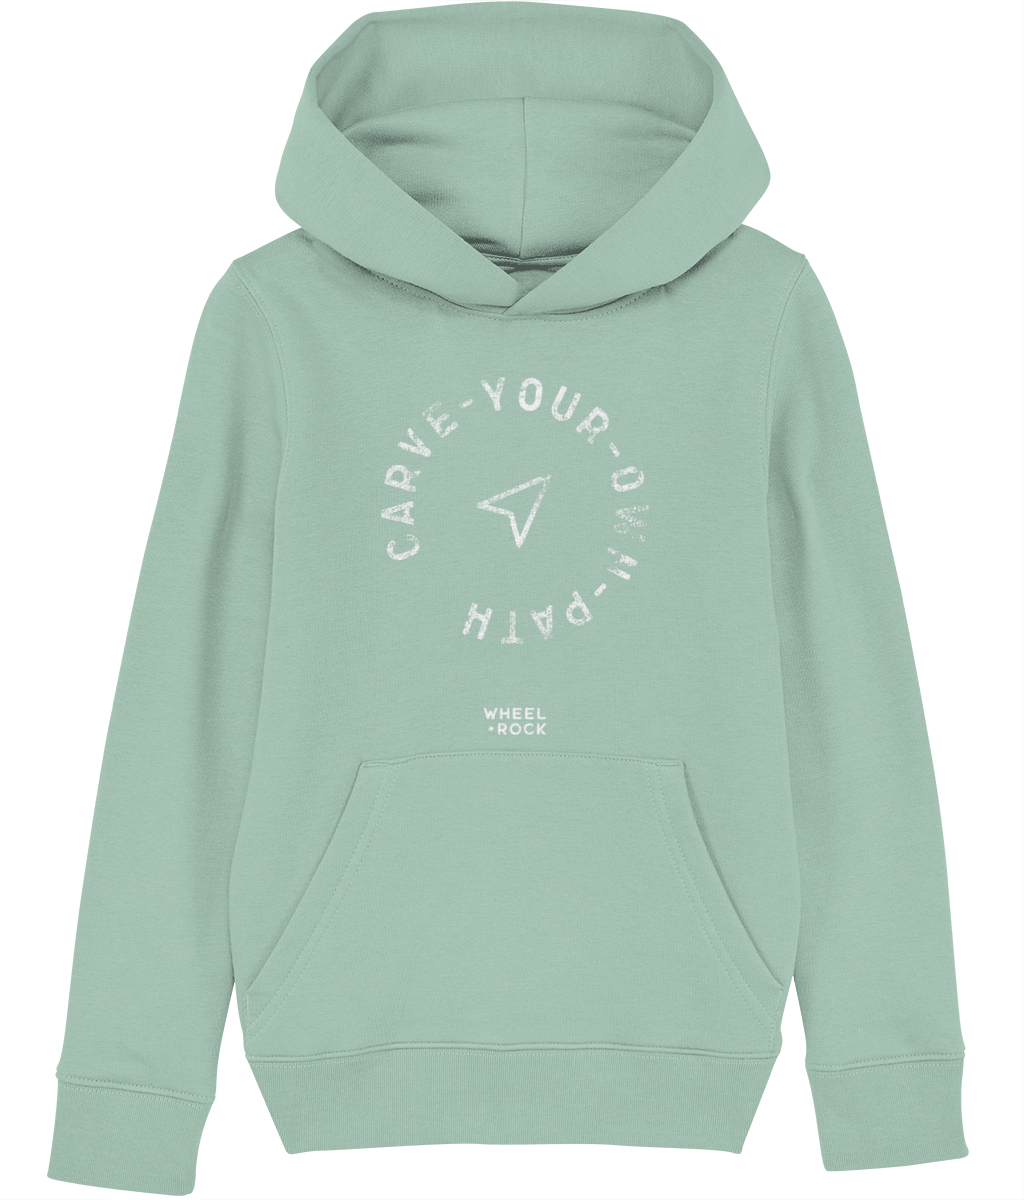 Carve Your Own Path - Kids Hoodie - GREENS